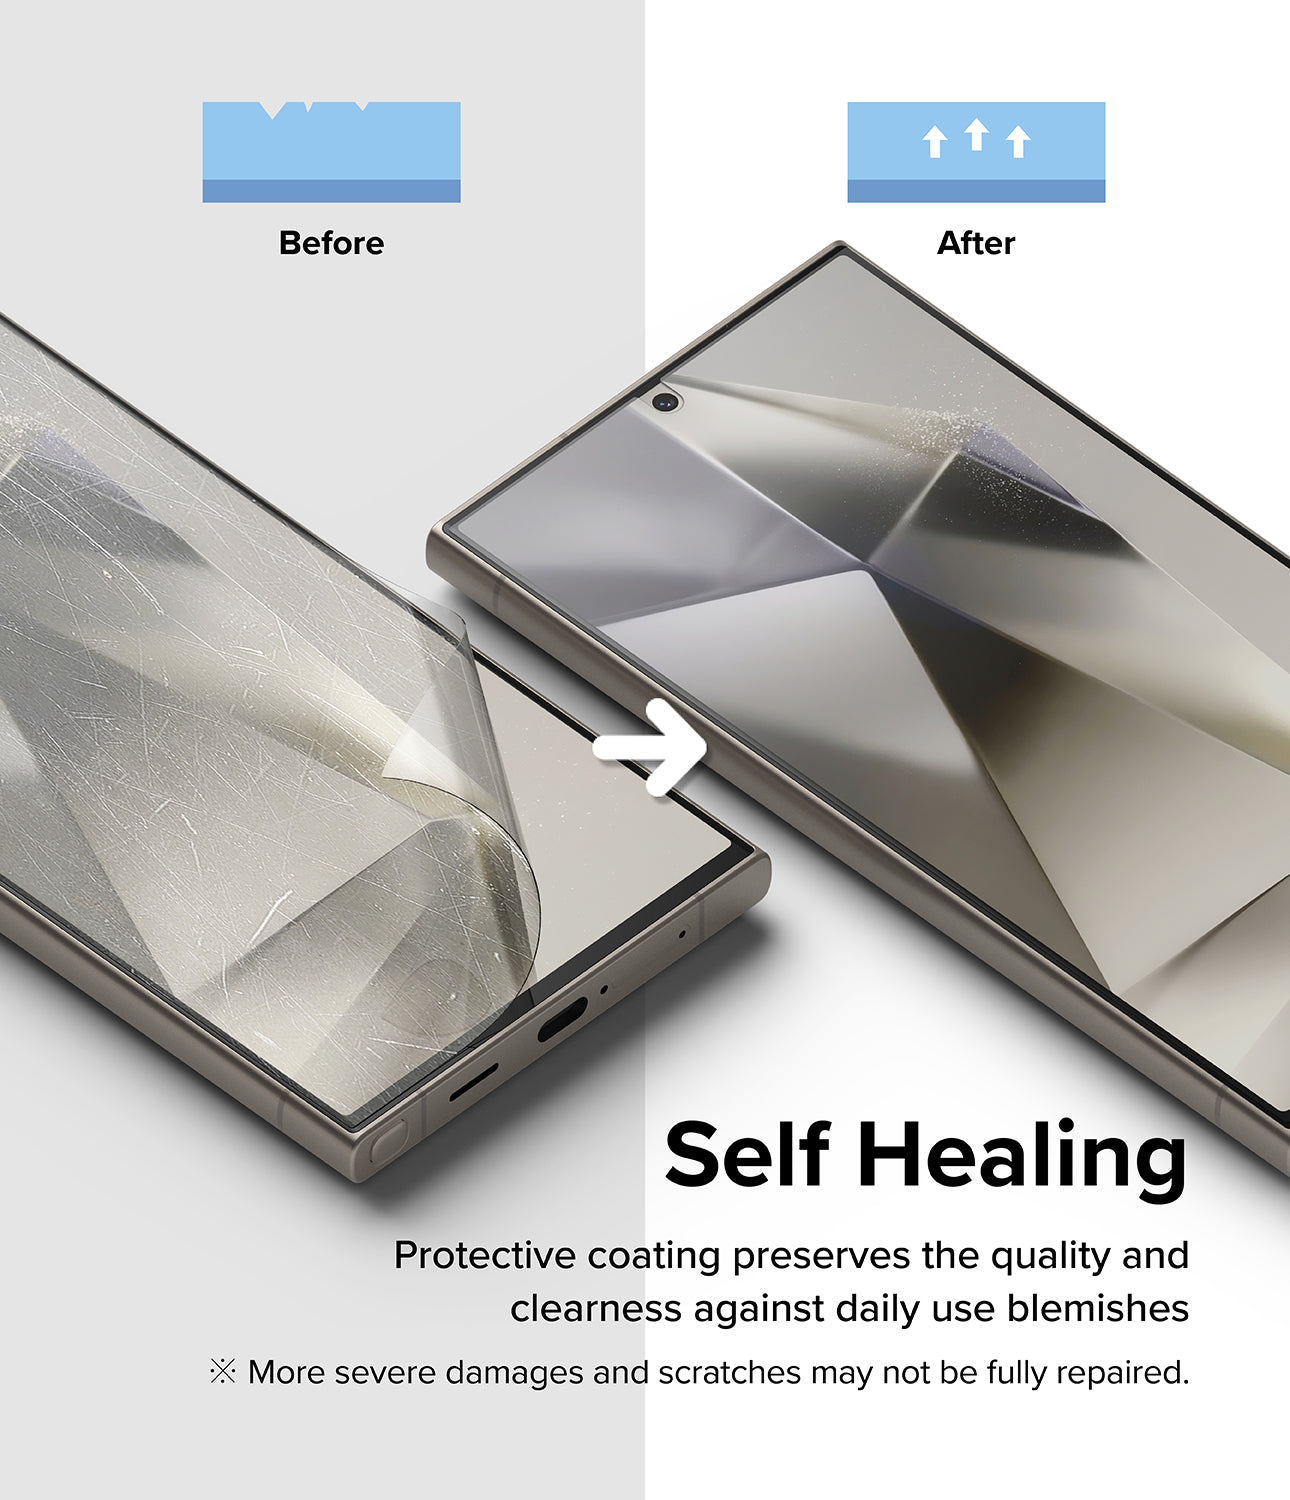 Samsung Galaxy S24 Ultra Screen Protector | Dual Easy Film Series |2 Pack, W Installation Jig